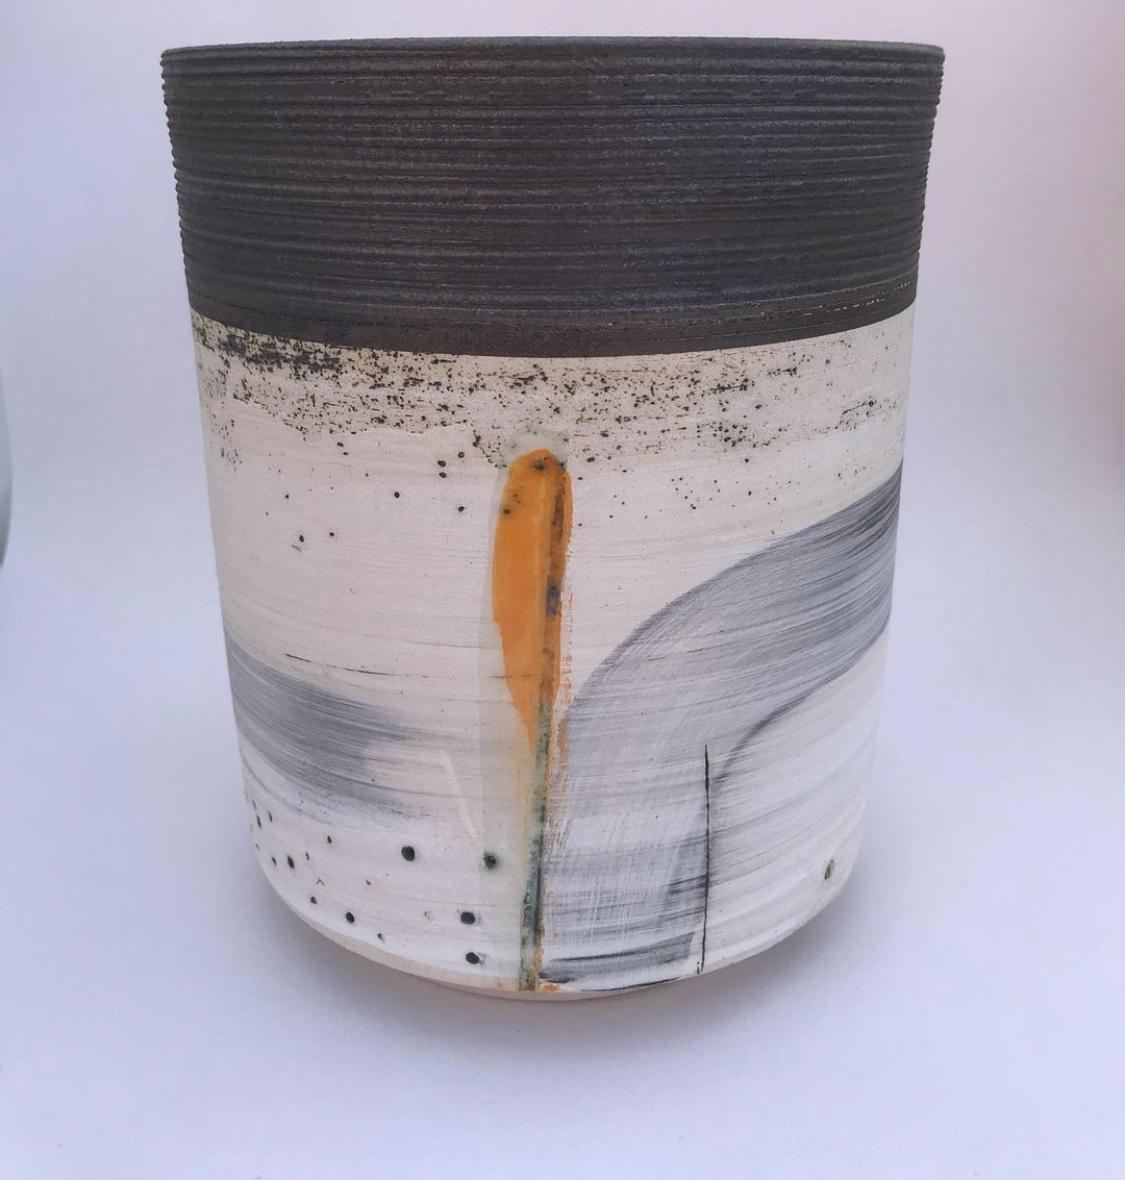 Thrown Pot: Inspired by found Object 